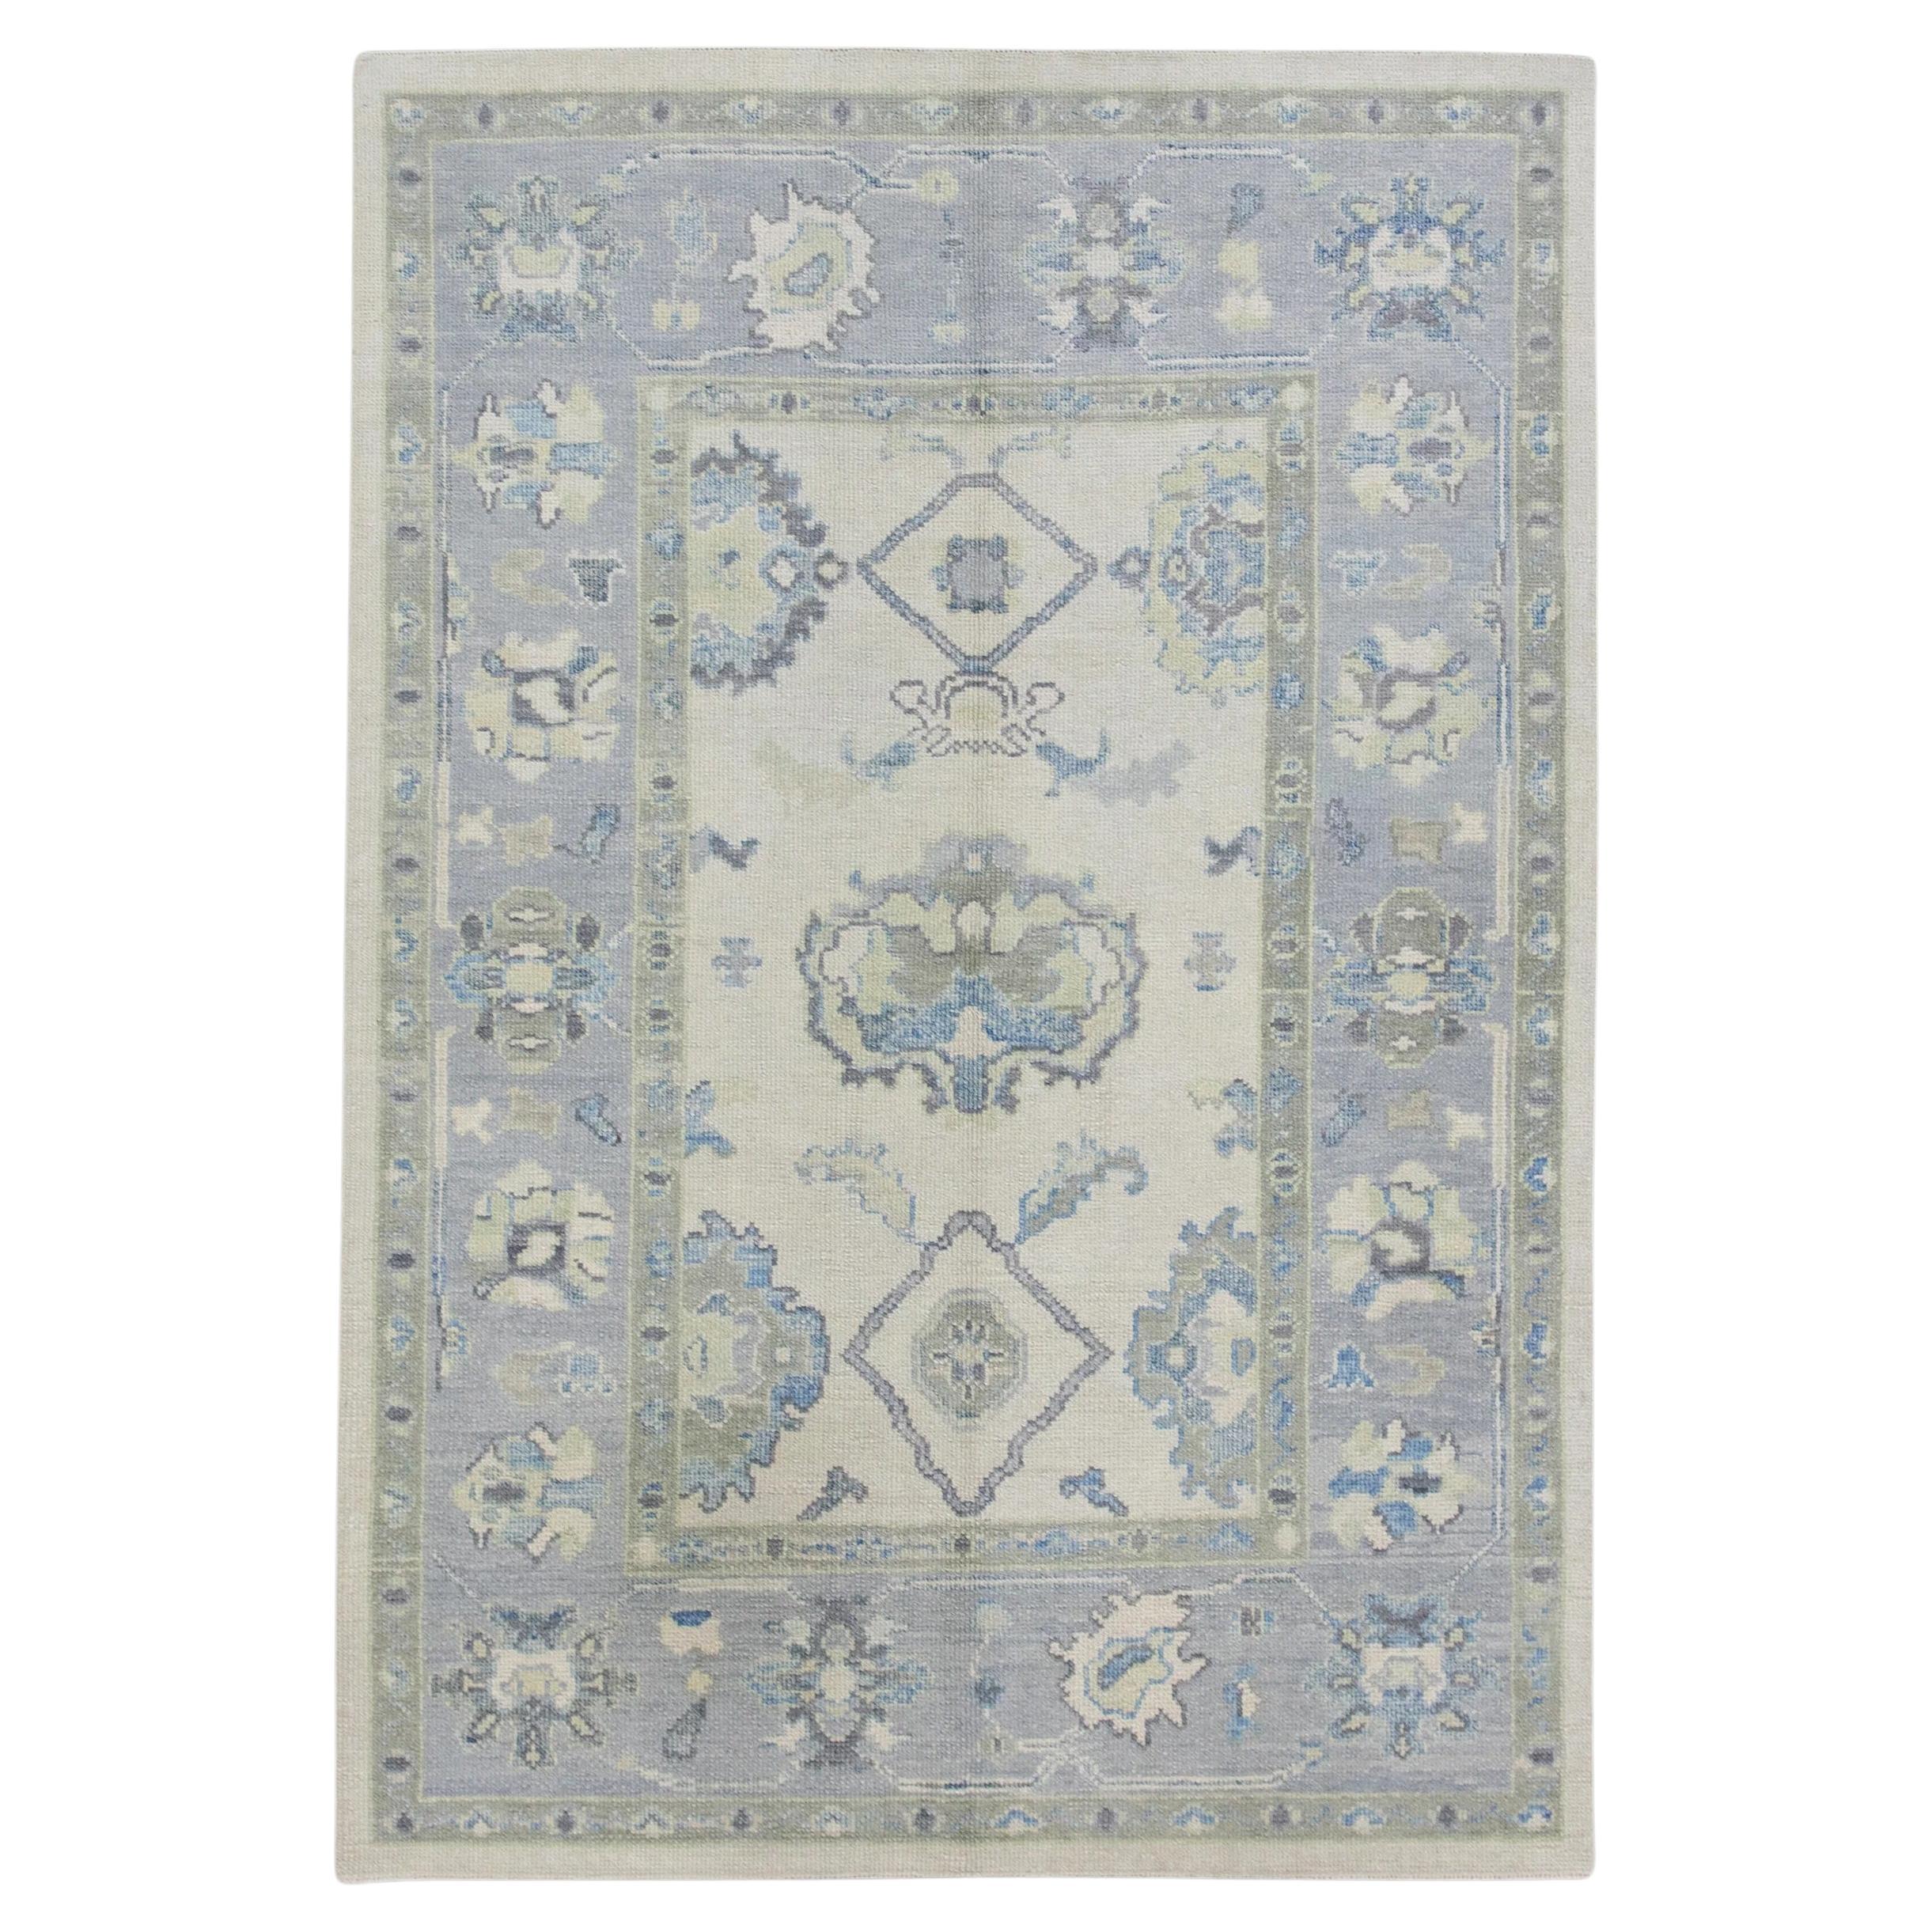 Blue and Green Floral Handwoven Wool Turkish Oushak Rug 4'10" x 7' For Sale